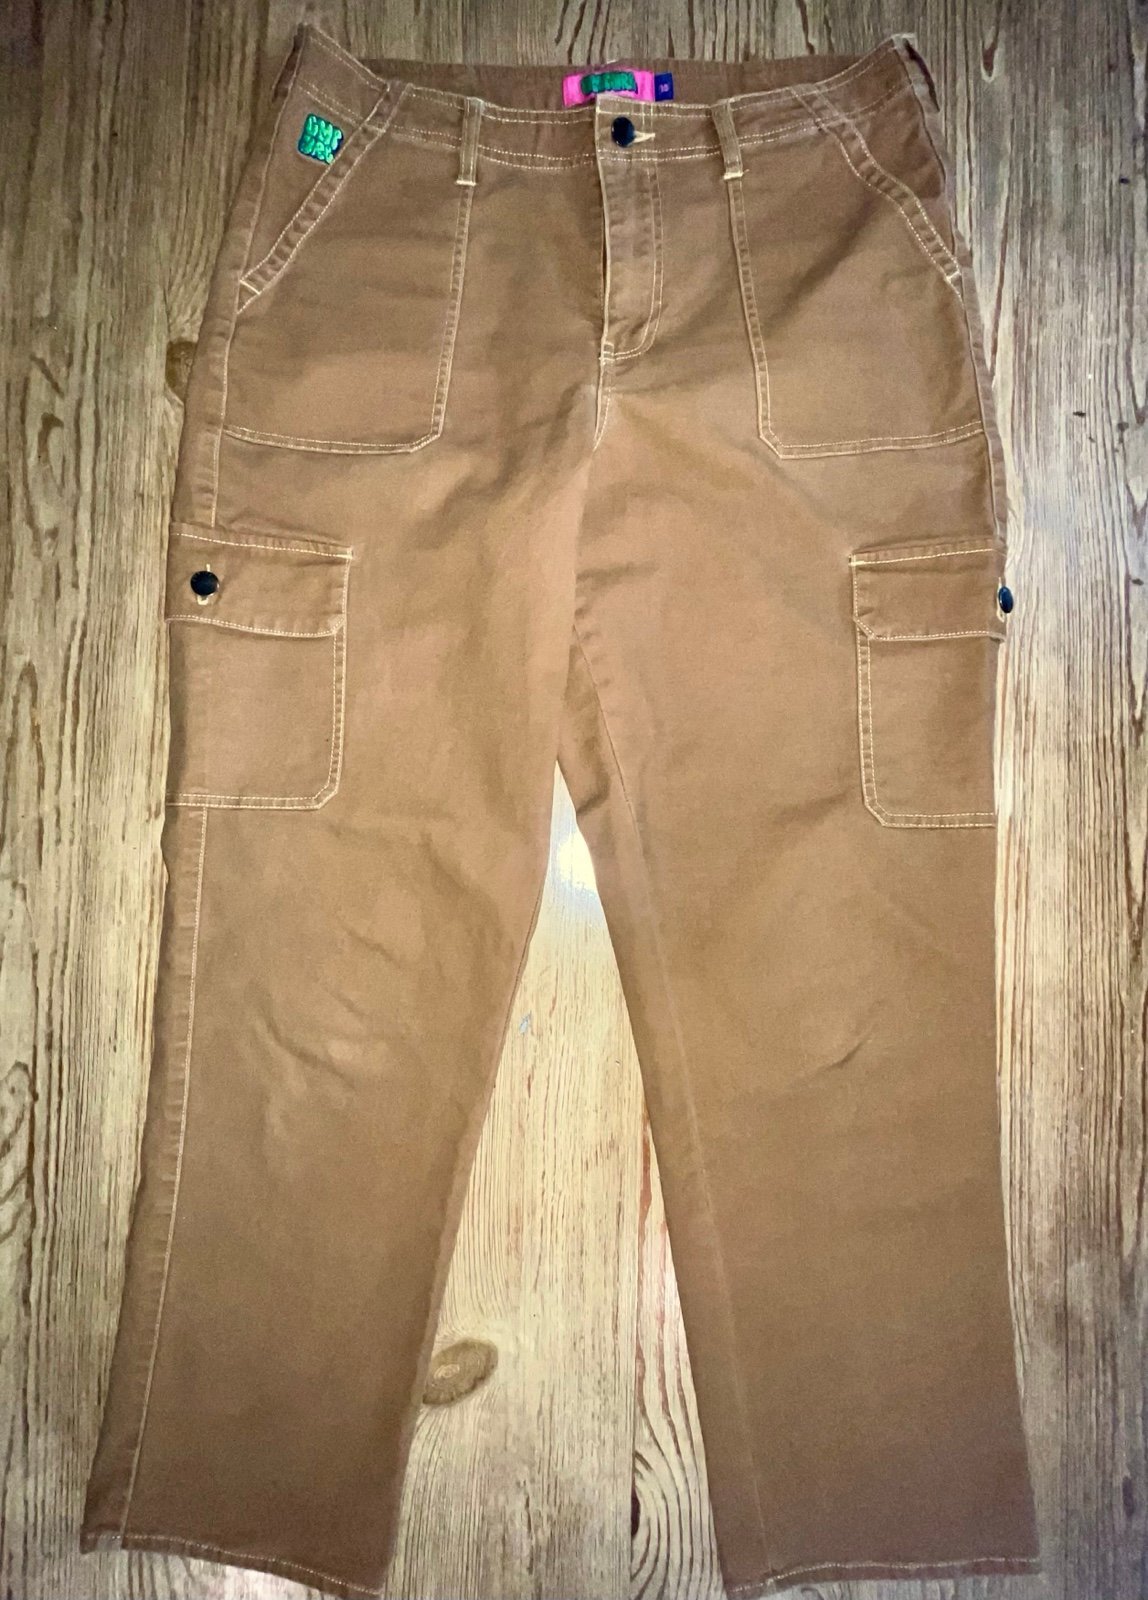 large selection Empyre women’s cargo pants Npxew85jV On